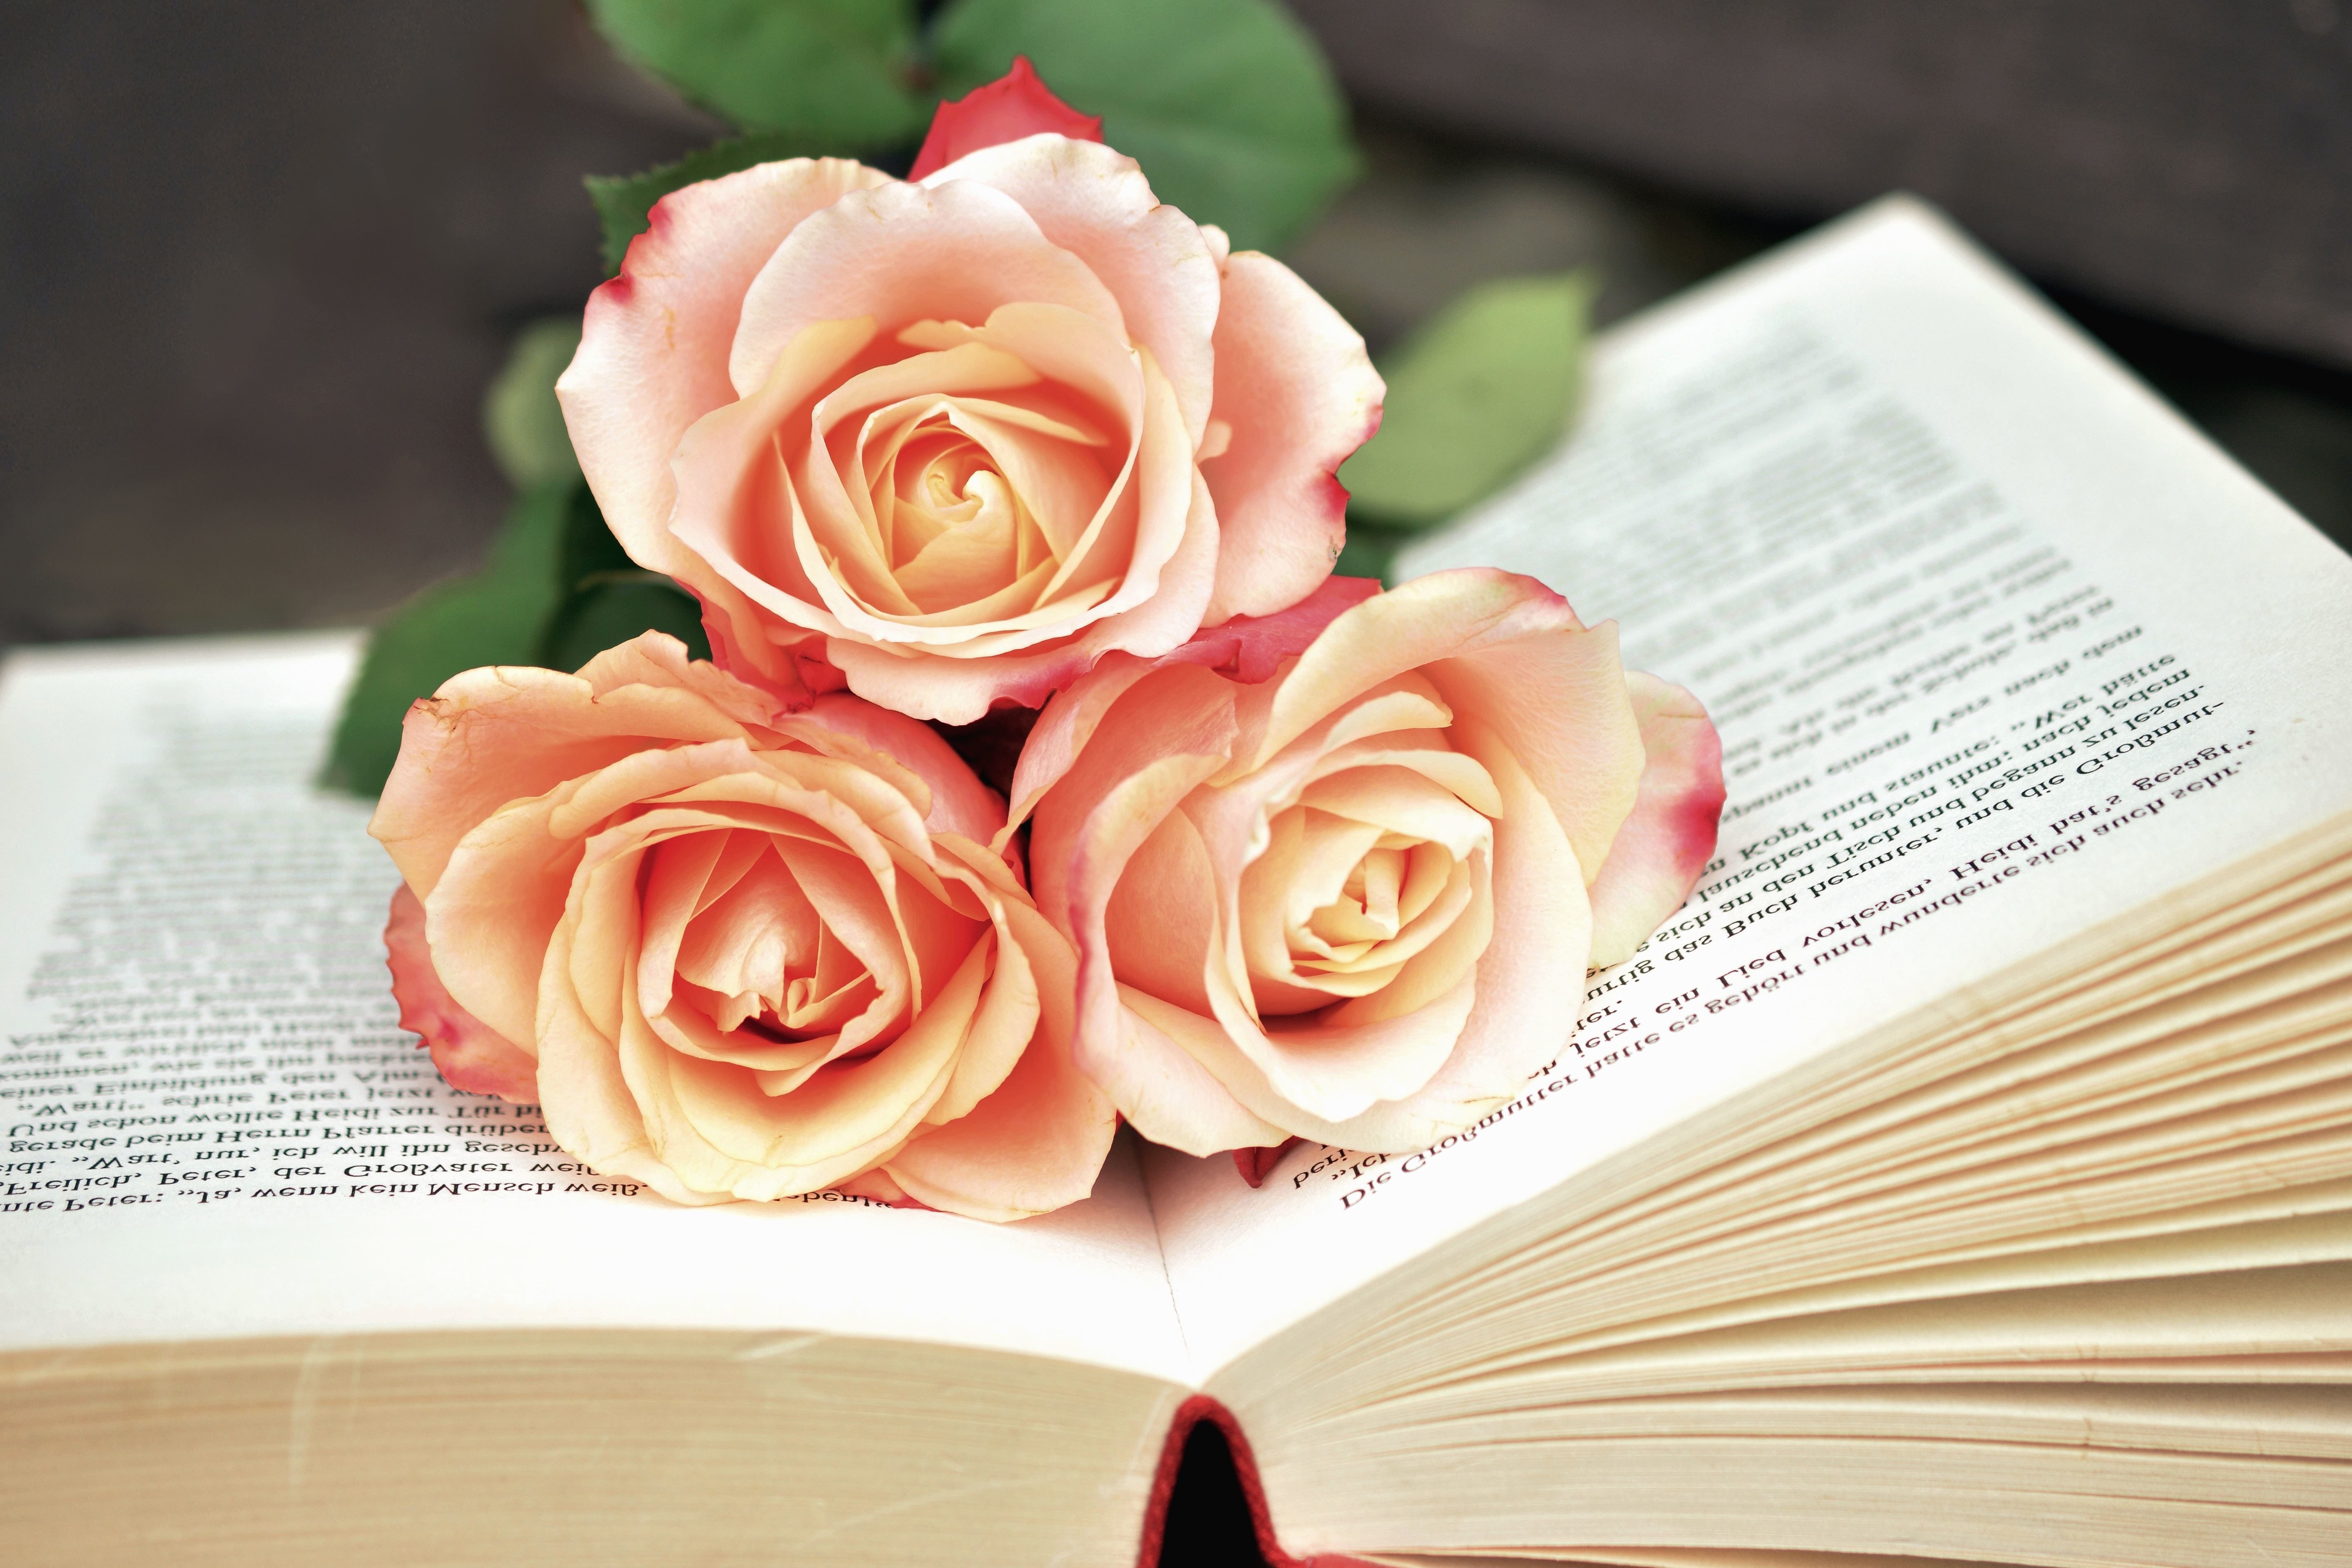 Free picture: rose, book, flowers, love, petals, plant, reading